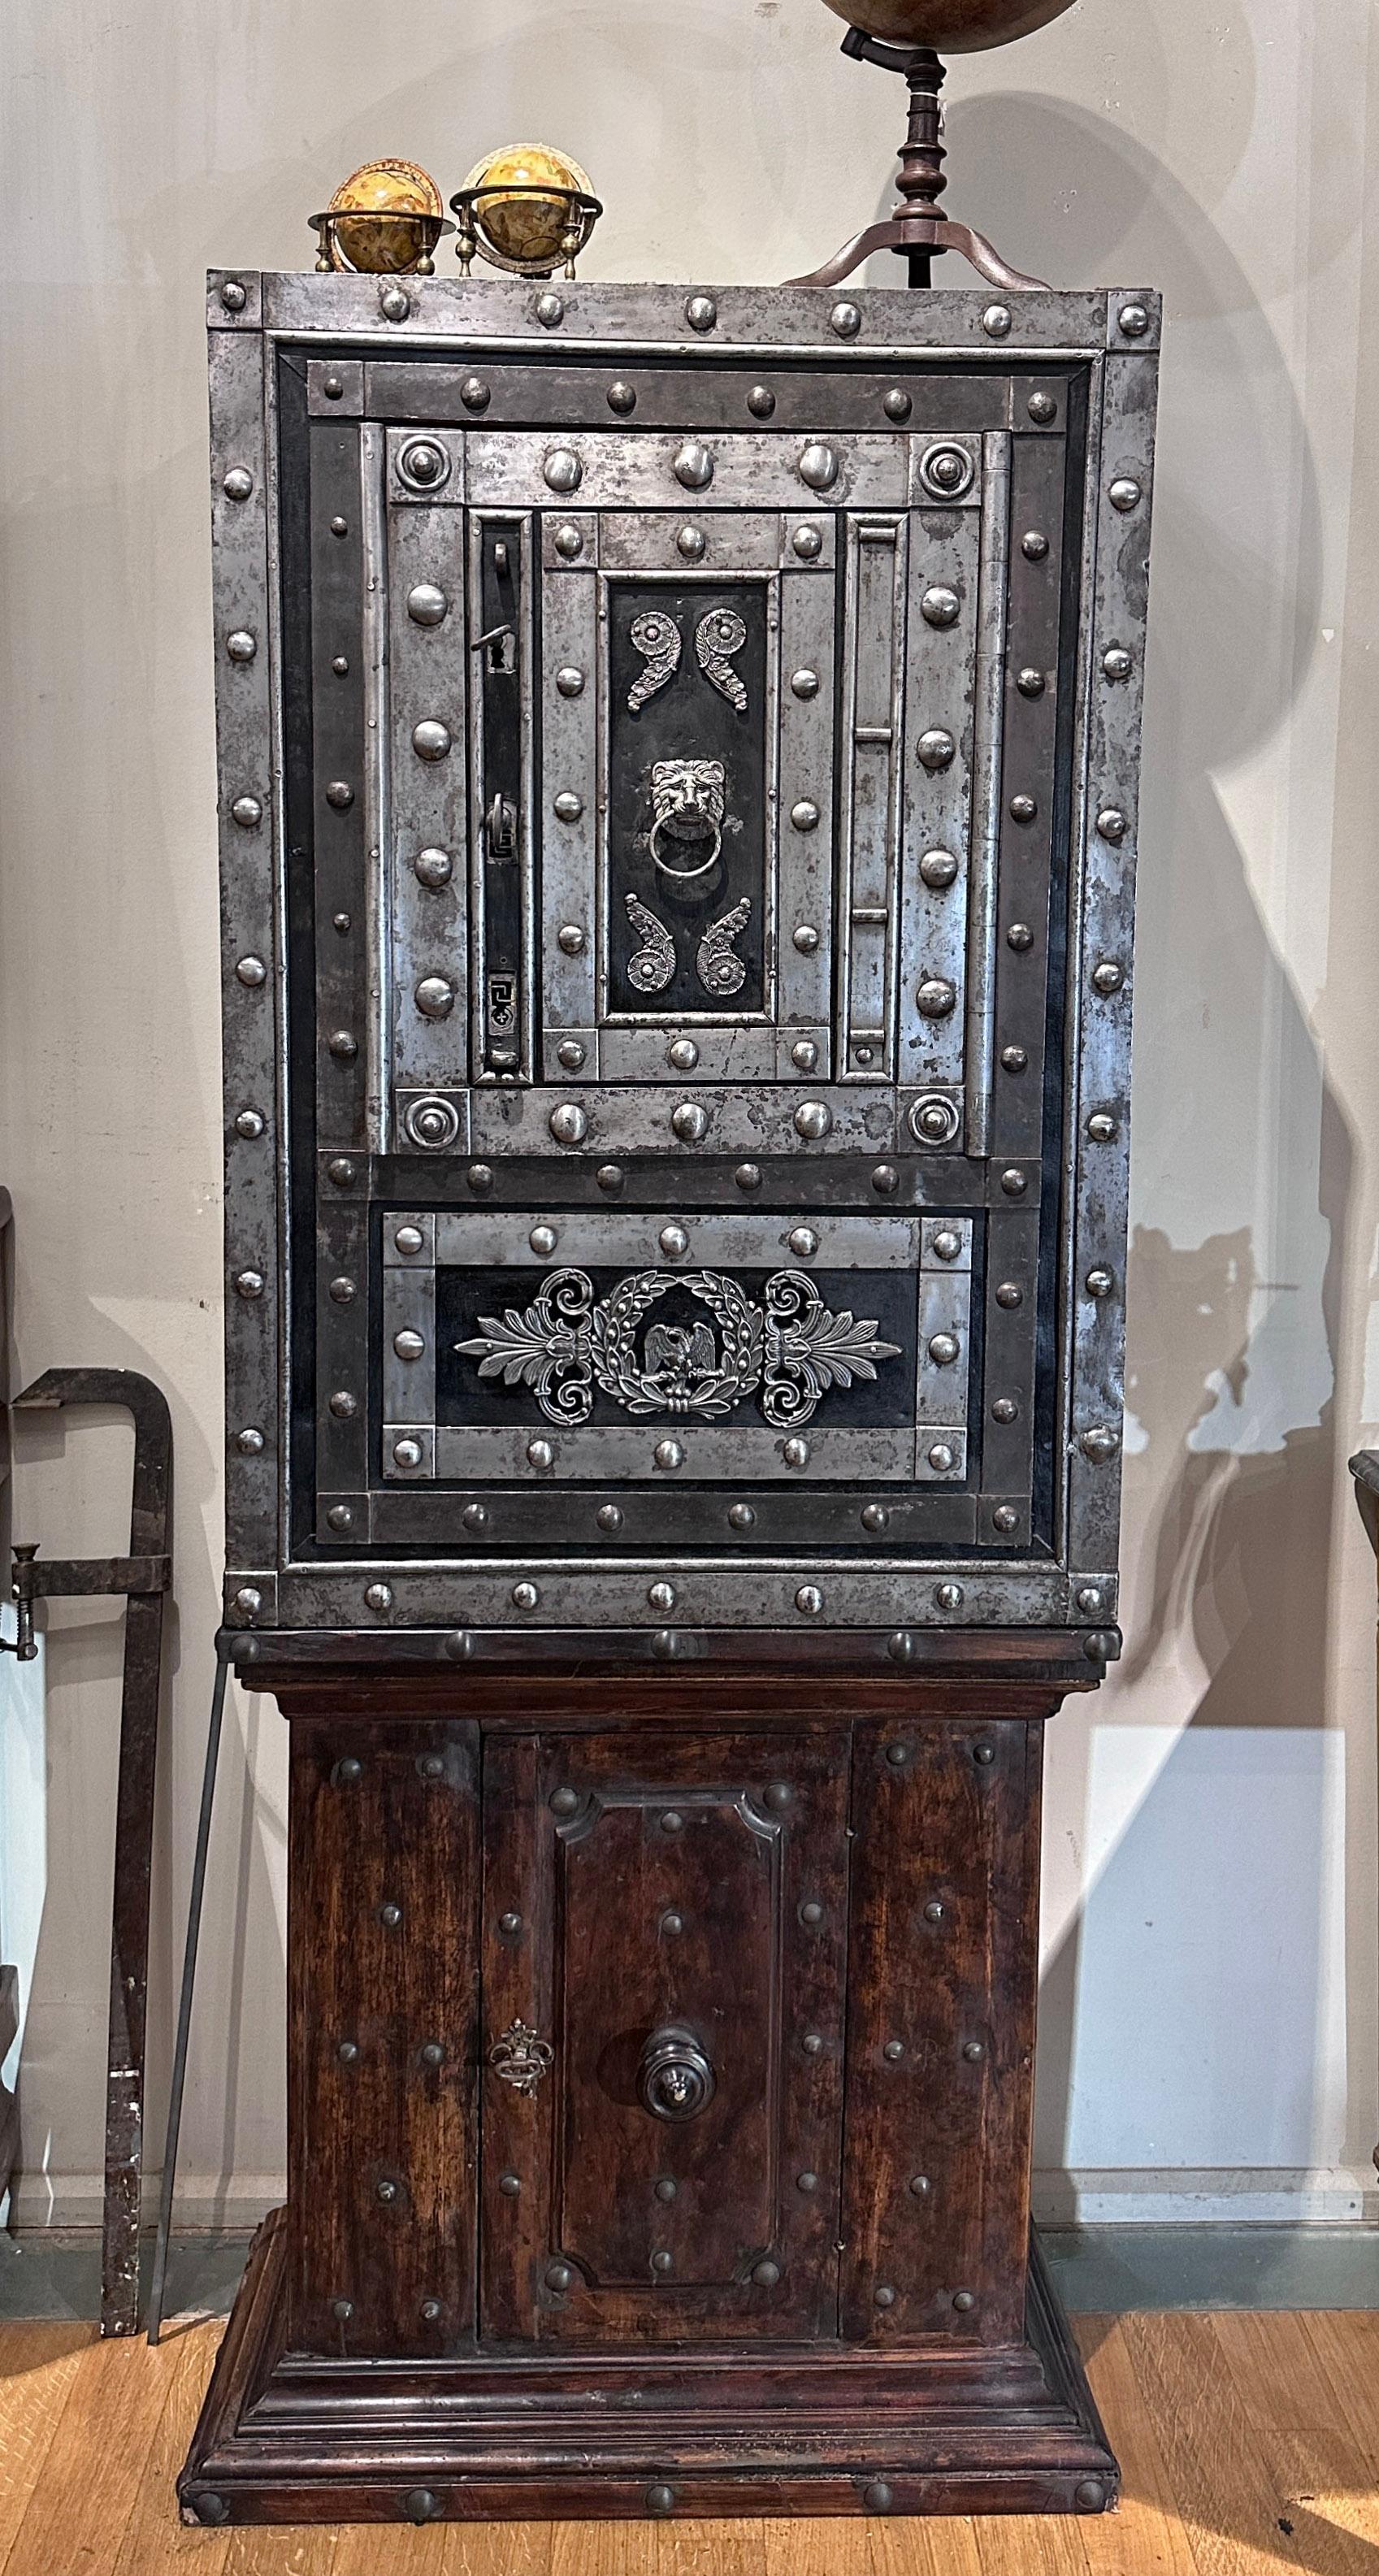 END OF 18th - EARLY 19th CENTURY IRON SAFE  For Sale 7